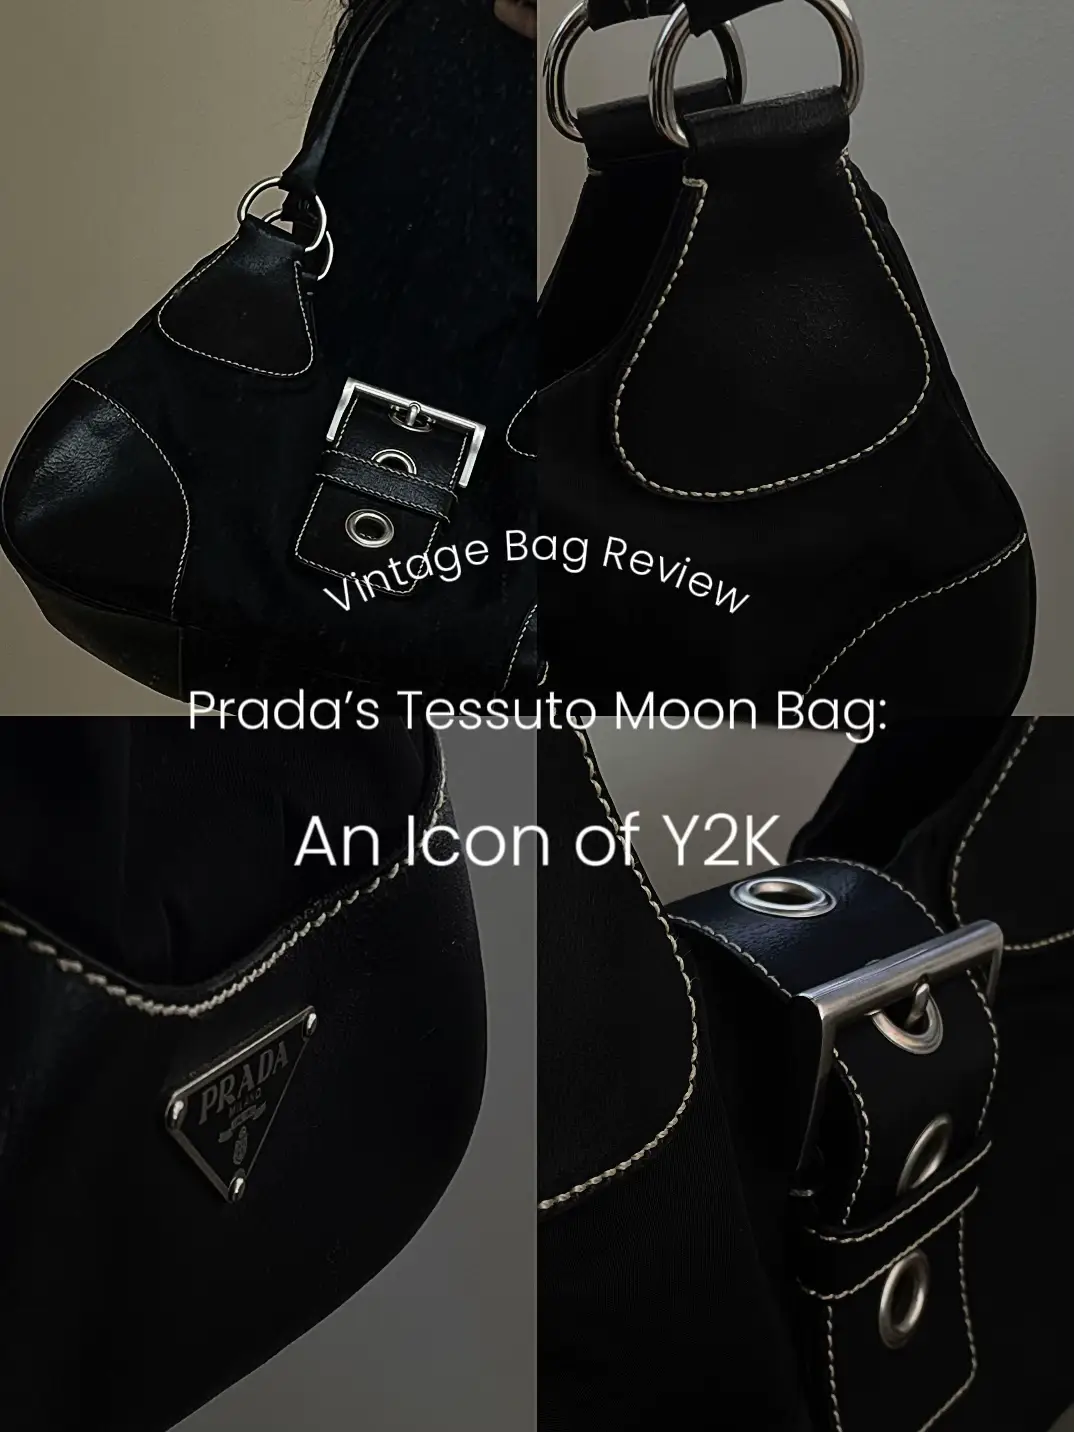 prada re-edition On Sale - Authenticated Resale